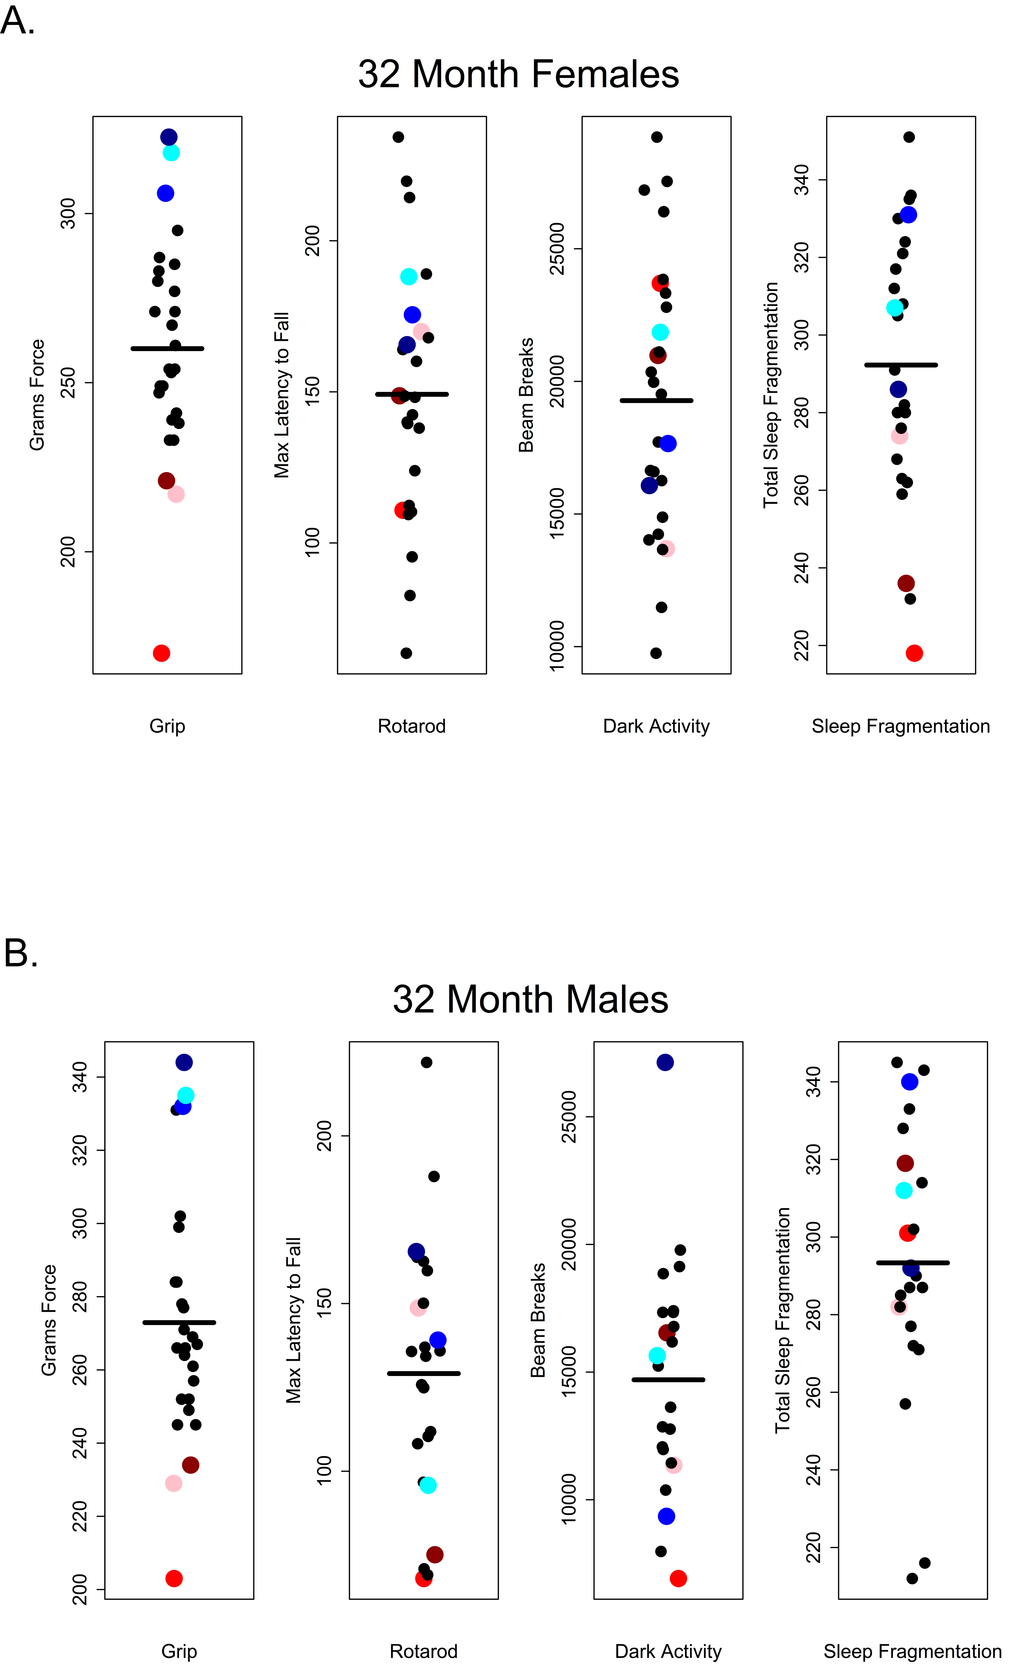 Grip strength does not predict rotarod performance, dark phase activity or sleep fragmentation in 32-month-old mice. Visual representation of the relative performance on four healthspan measures by 28-month-old mice. Mice performing best (blue symbols) and worst (red symbols) on the grip strength test, did not perform similarly on other measures of healthspan in females (A) and males (B). Correlations and p-values are in Tables 2 and 3.